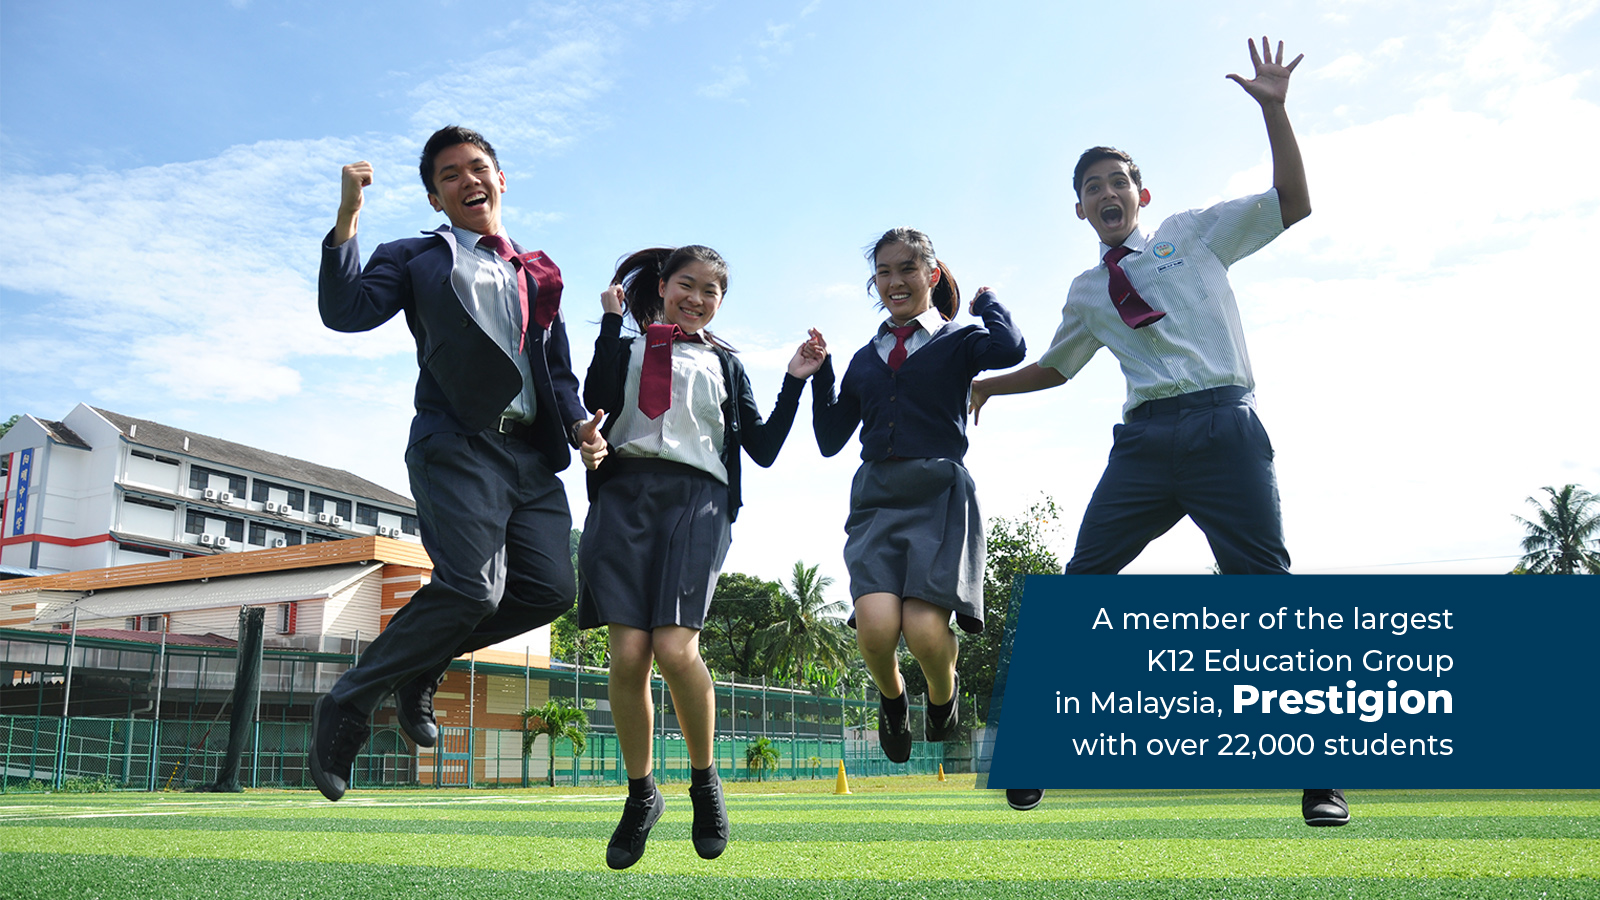 List Of Private Schools In Malaysia - Erpooes - List Of Private Schools In Malaysia